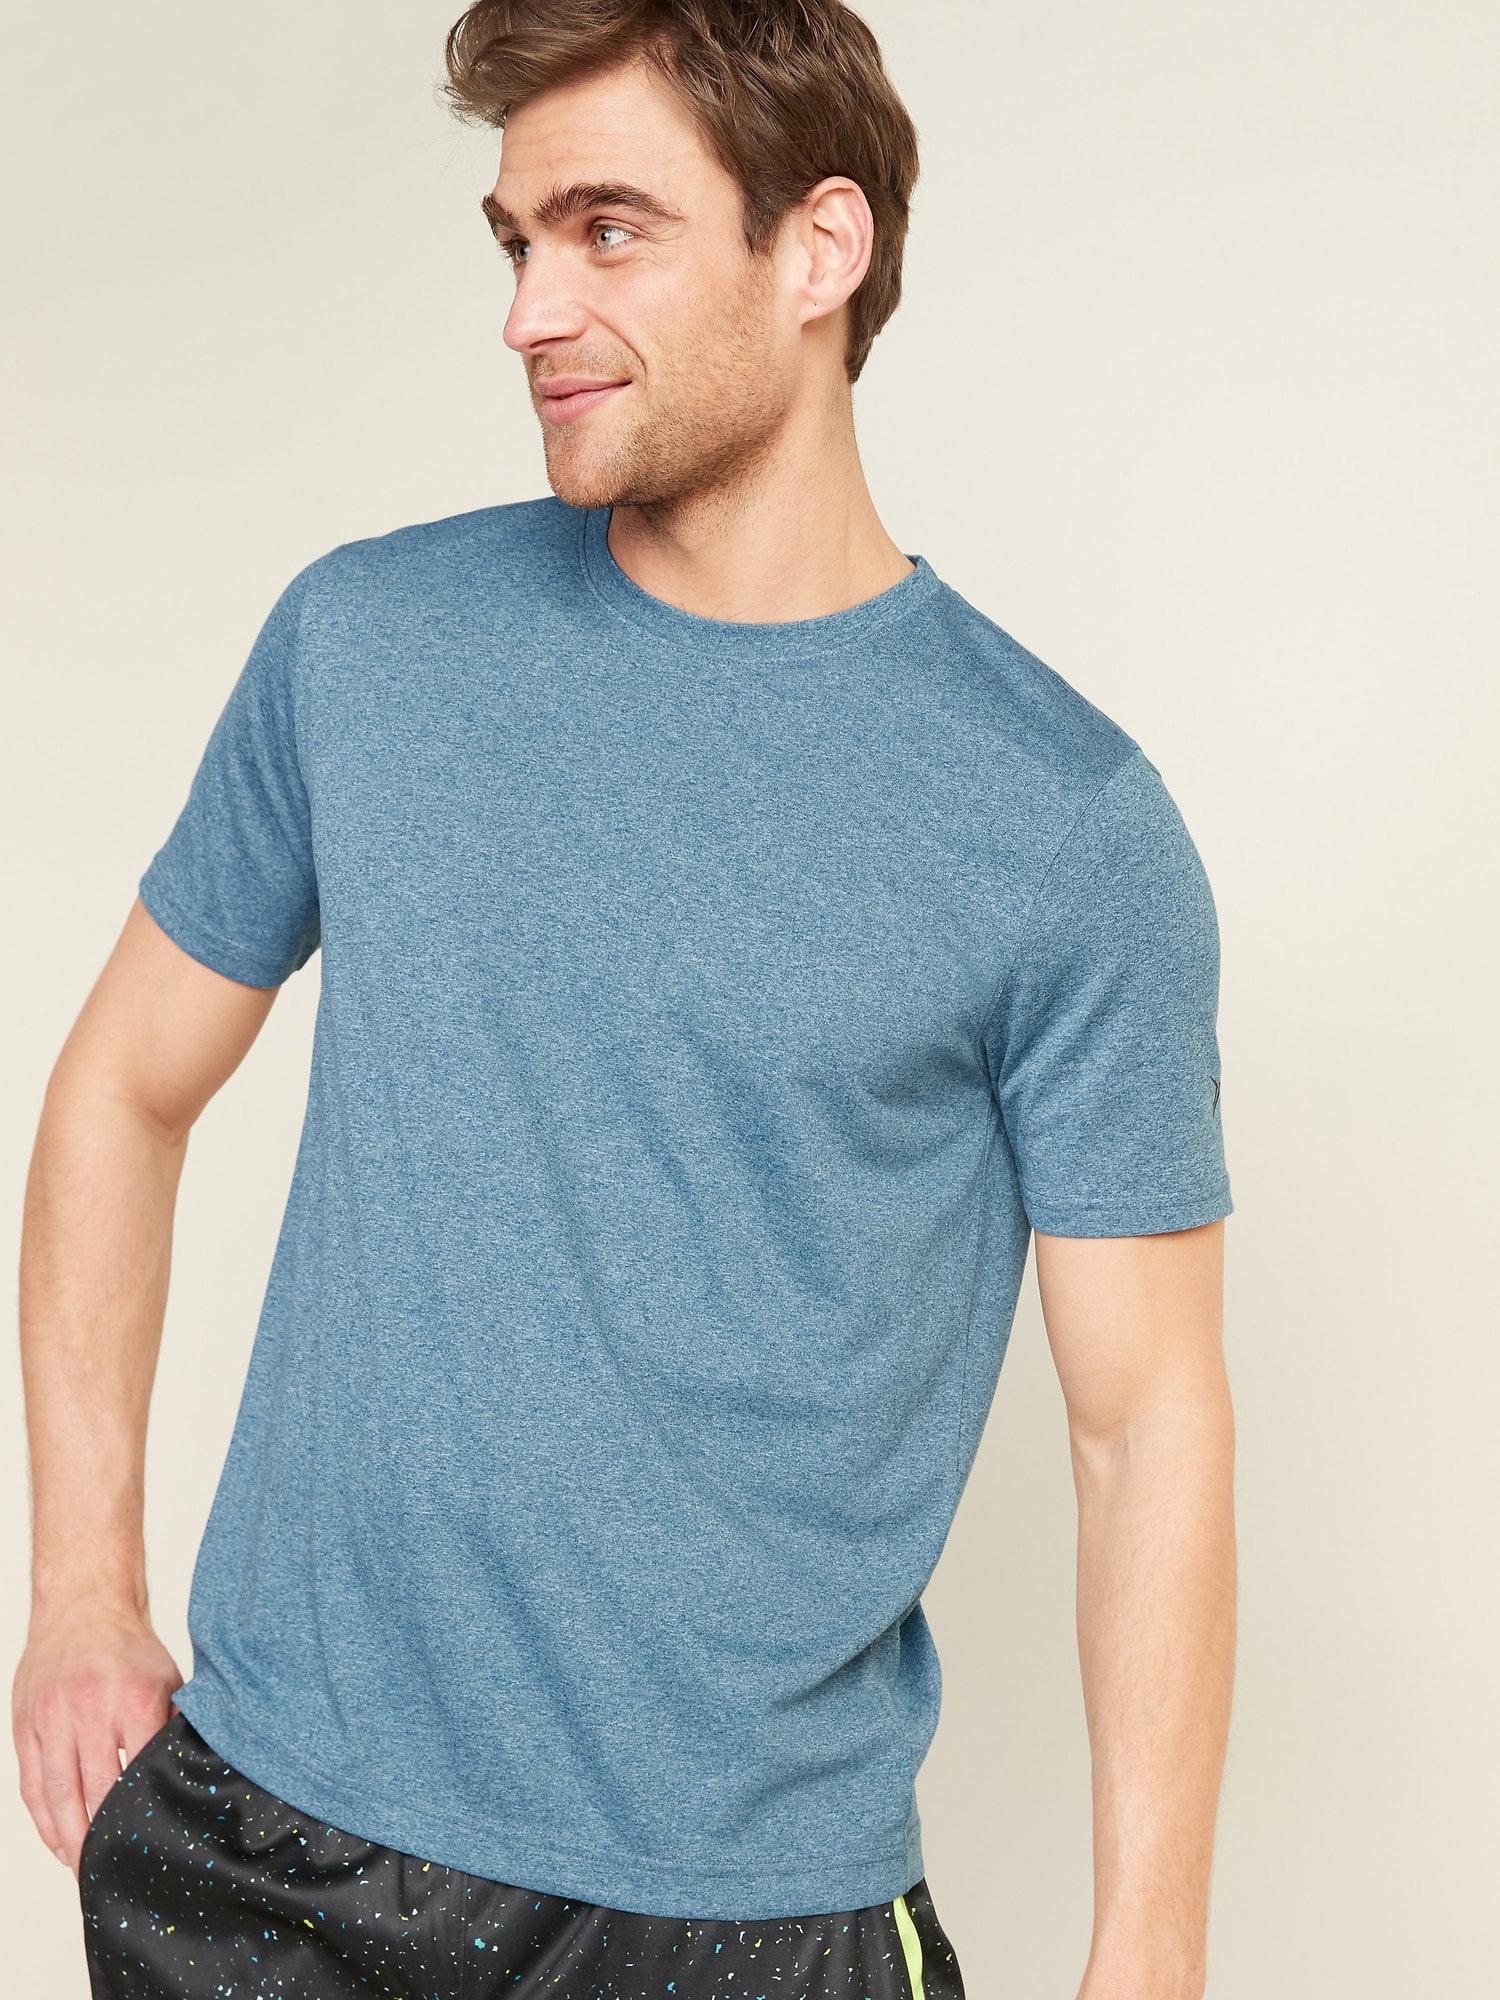 Old Navy  Smart casual men, Mens graphic tee, T shirt and jeans